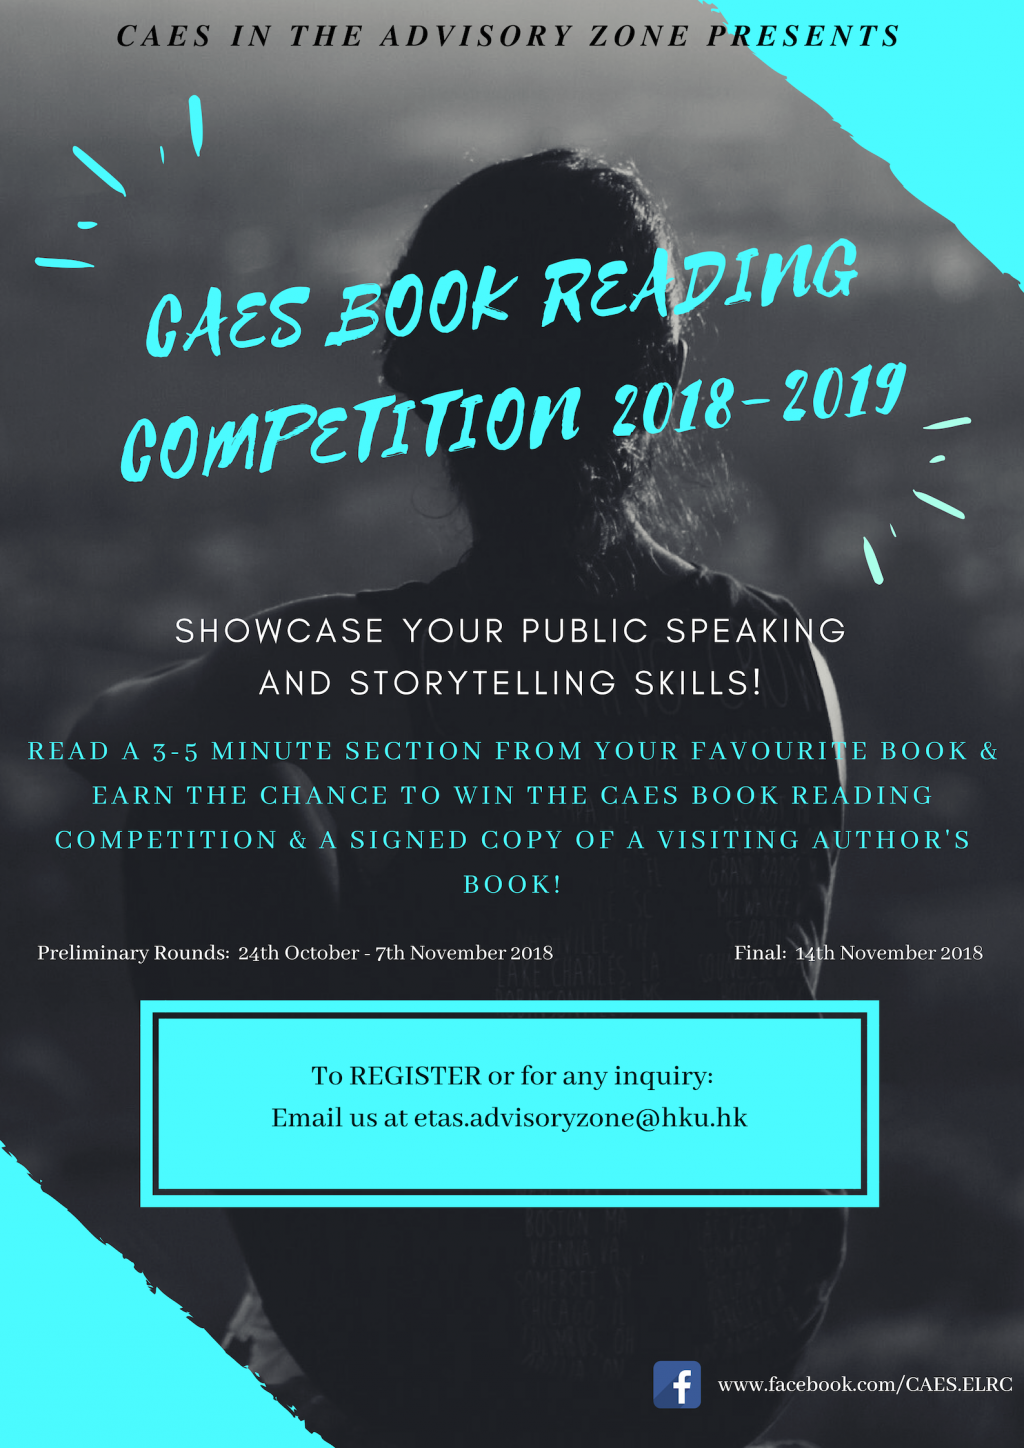 CAES Book Reading Competition